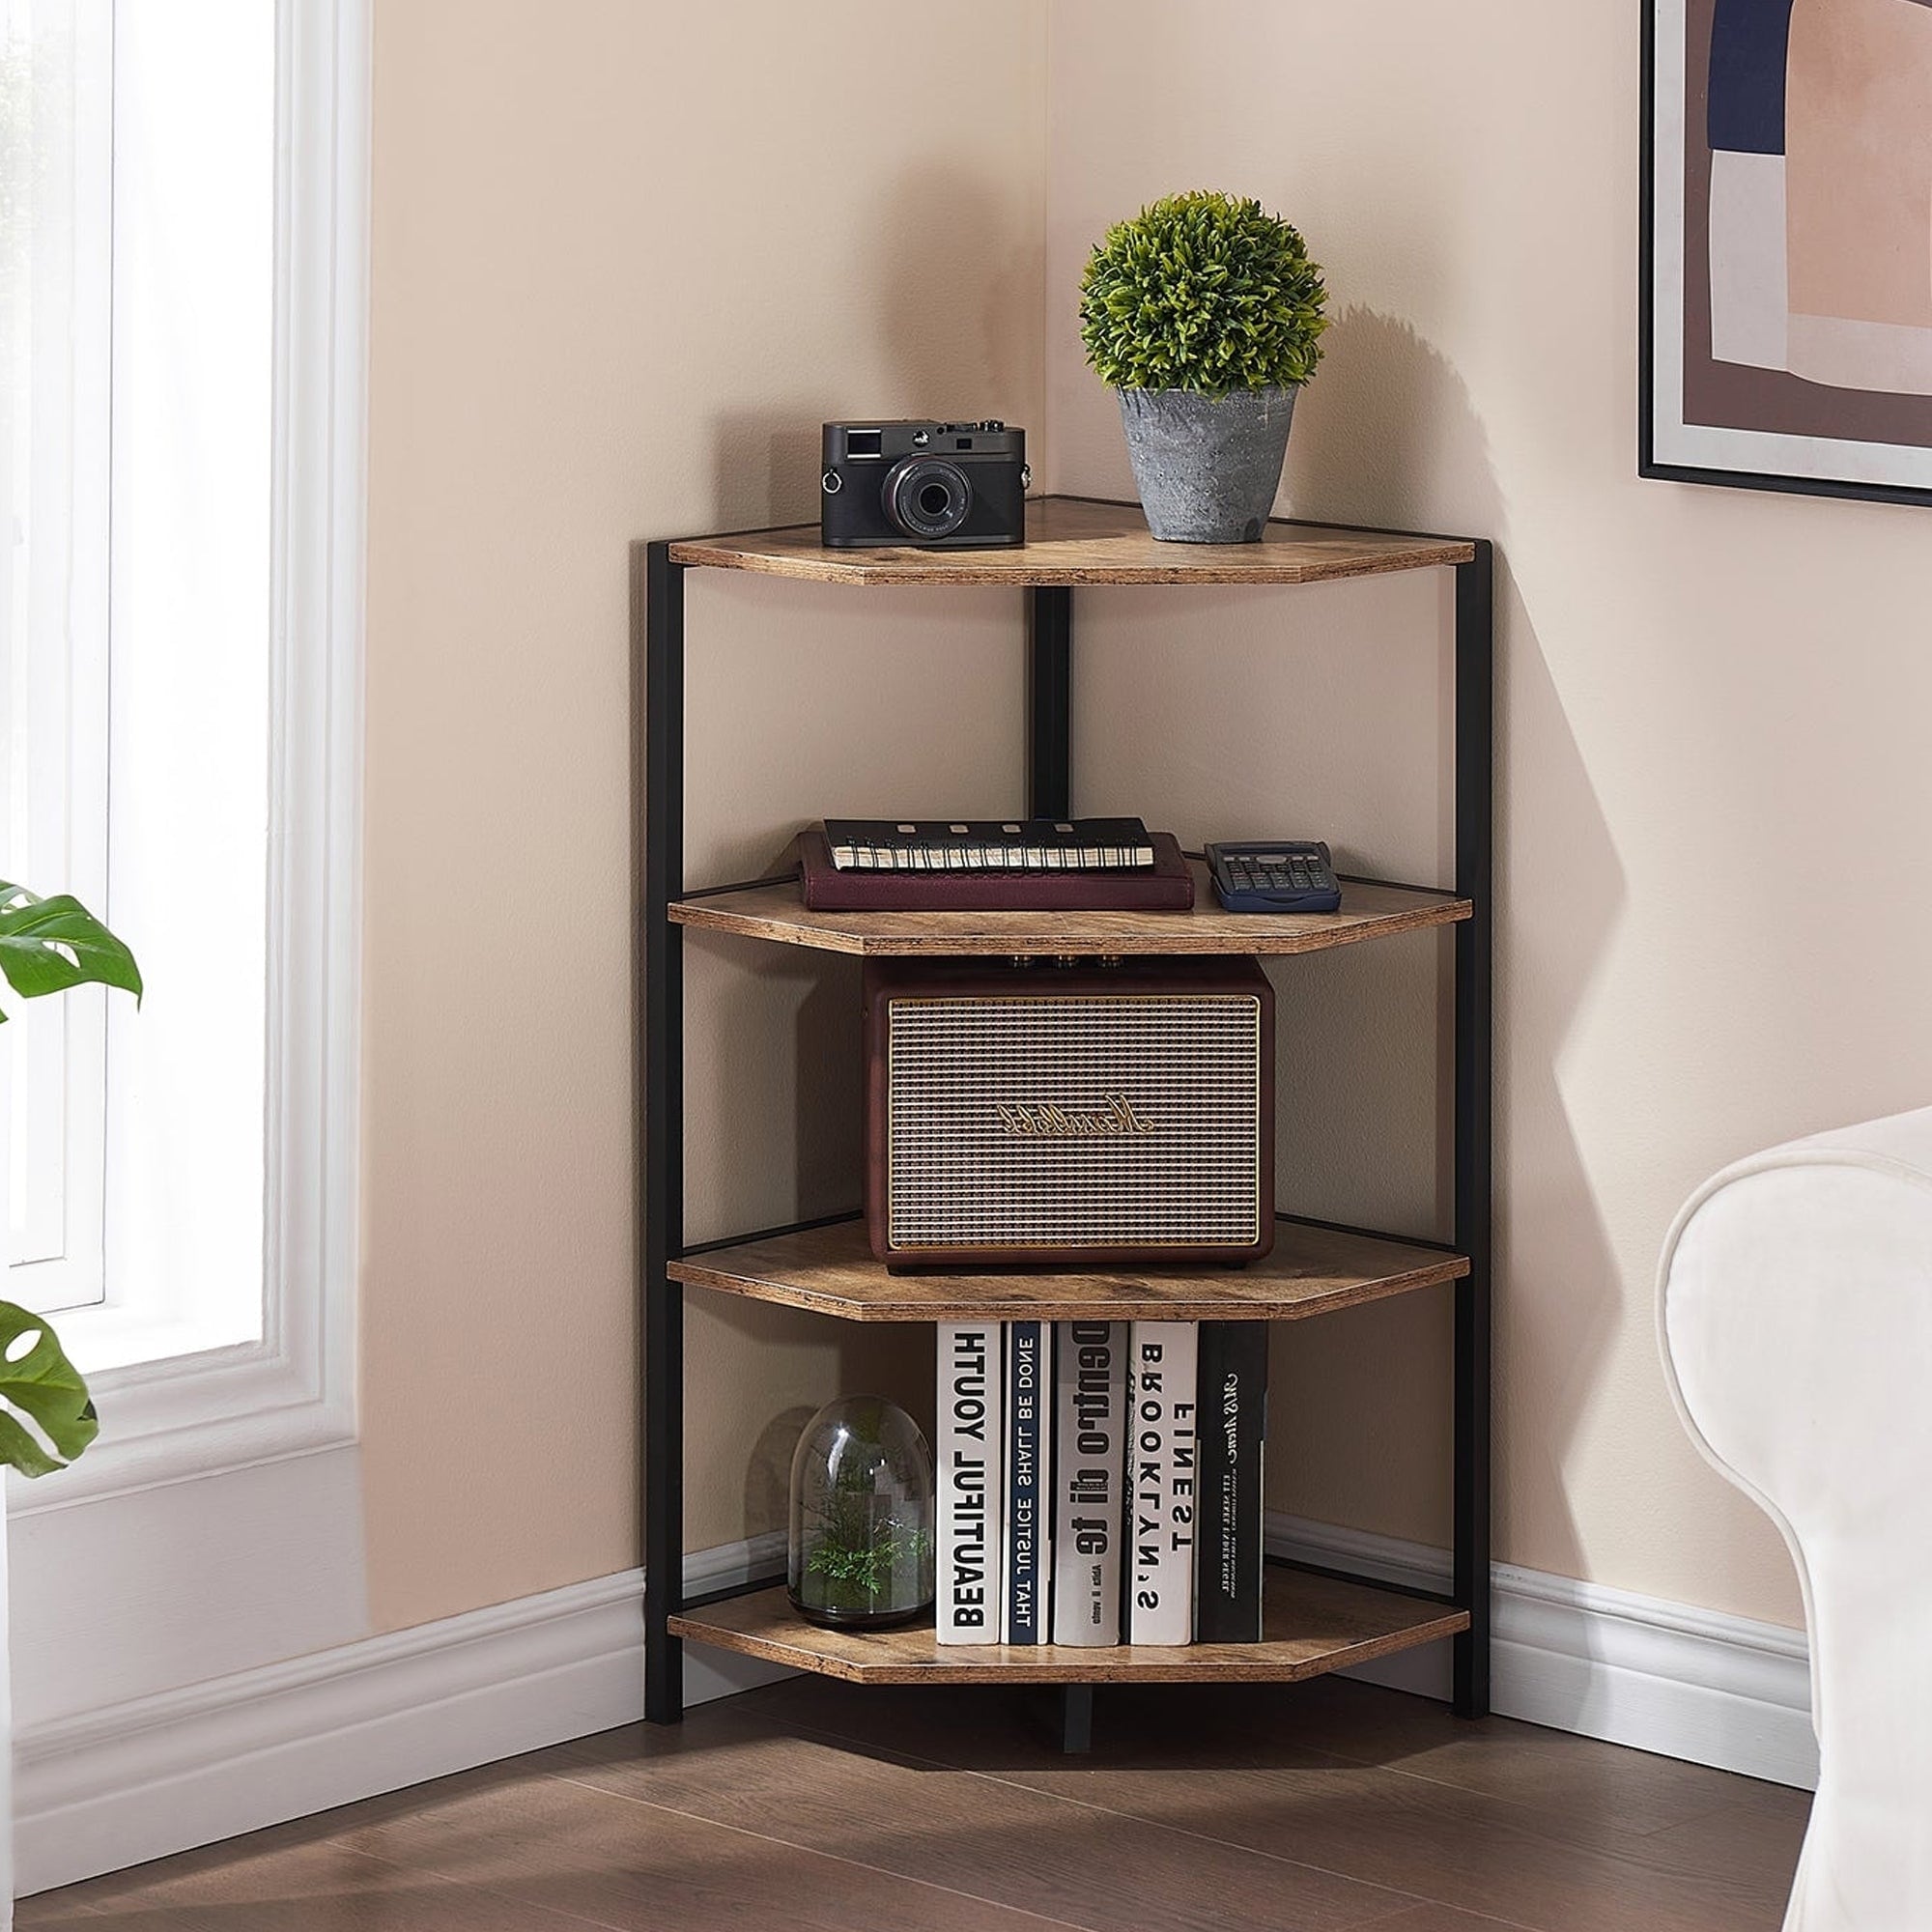 https://ak1.ostkcdn.com/images/products/is/images/direct/d82611d50c10ff59dcdbaef84a69c15b1d8e6378/VECELO-4-Tier-Polygonal-Corner-Shelf-for-Small-Spaces.jpg